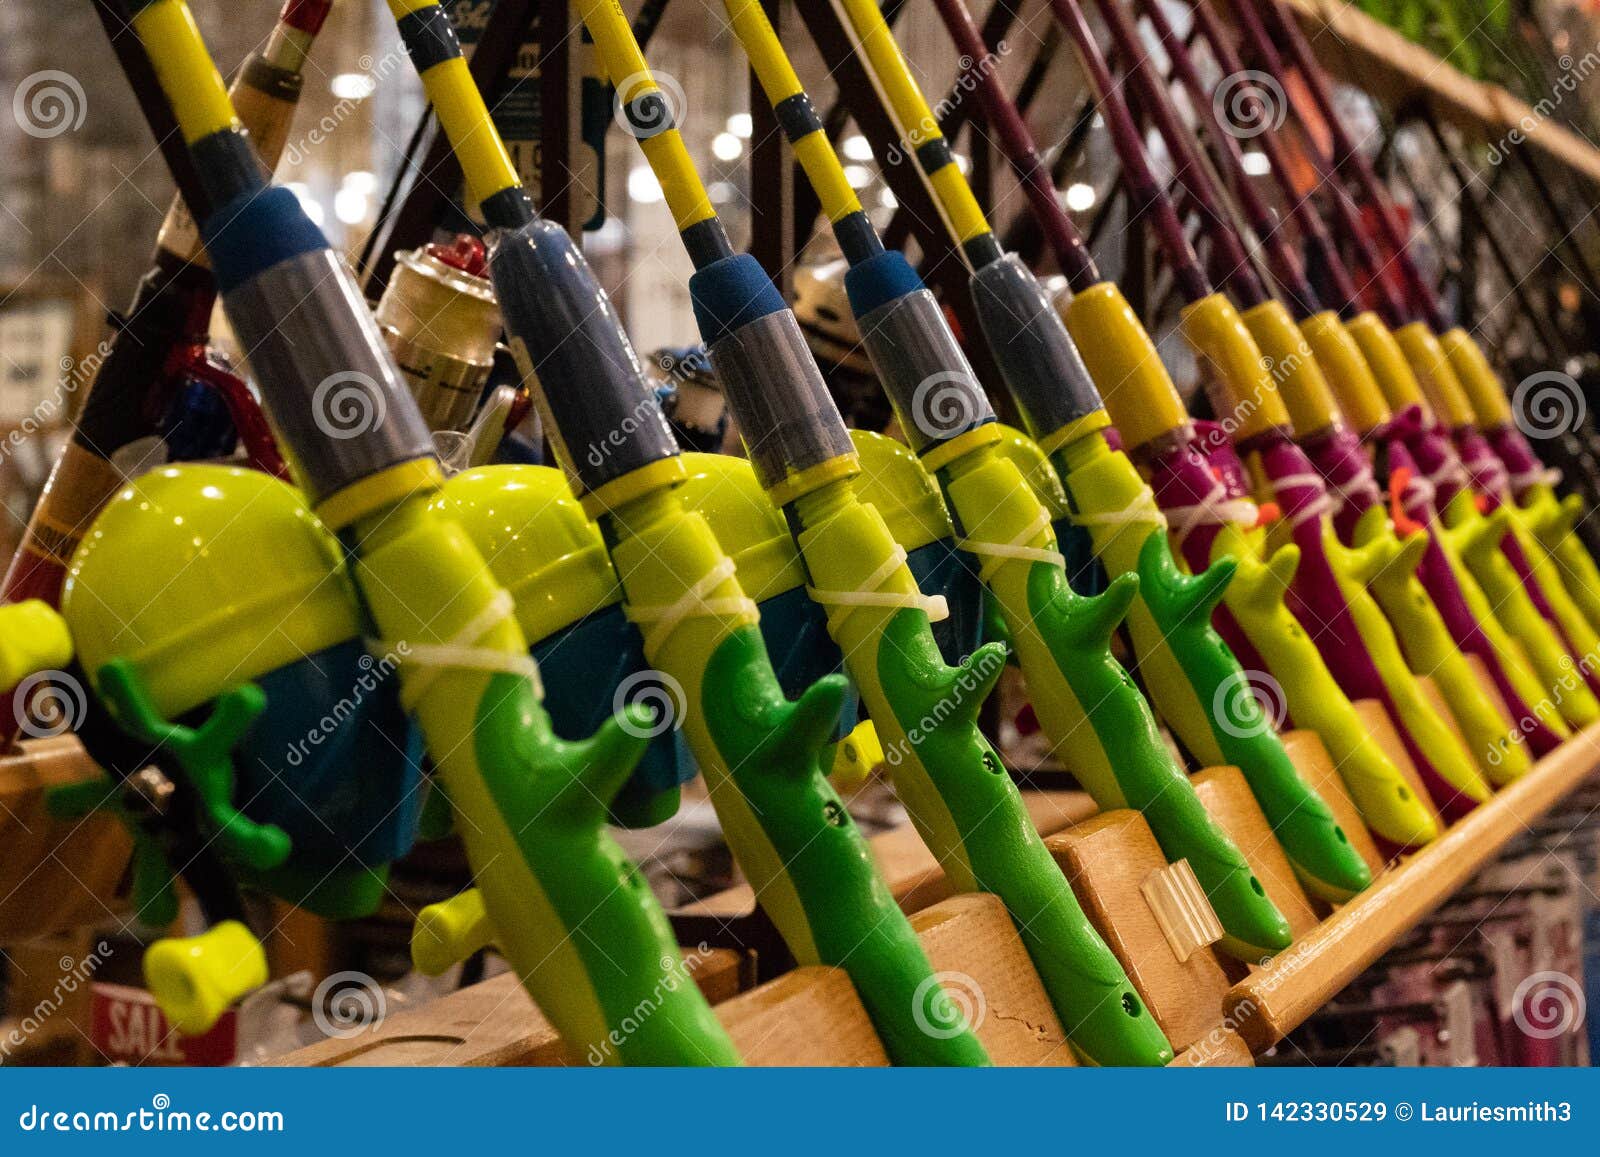 Brightly Coloured Fishing Rods on Display in World-renowned